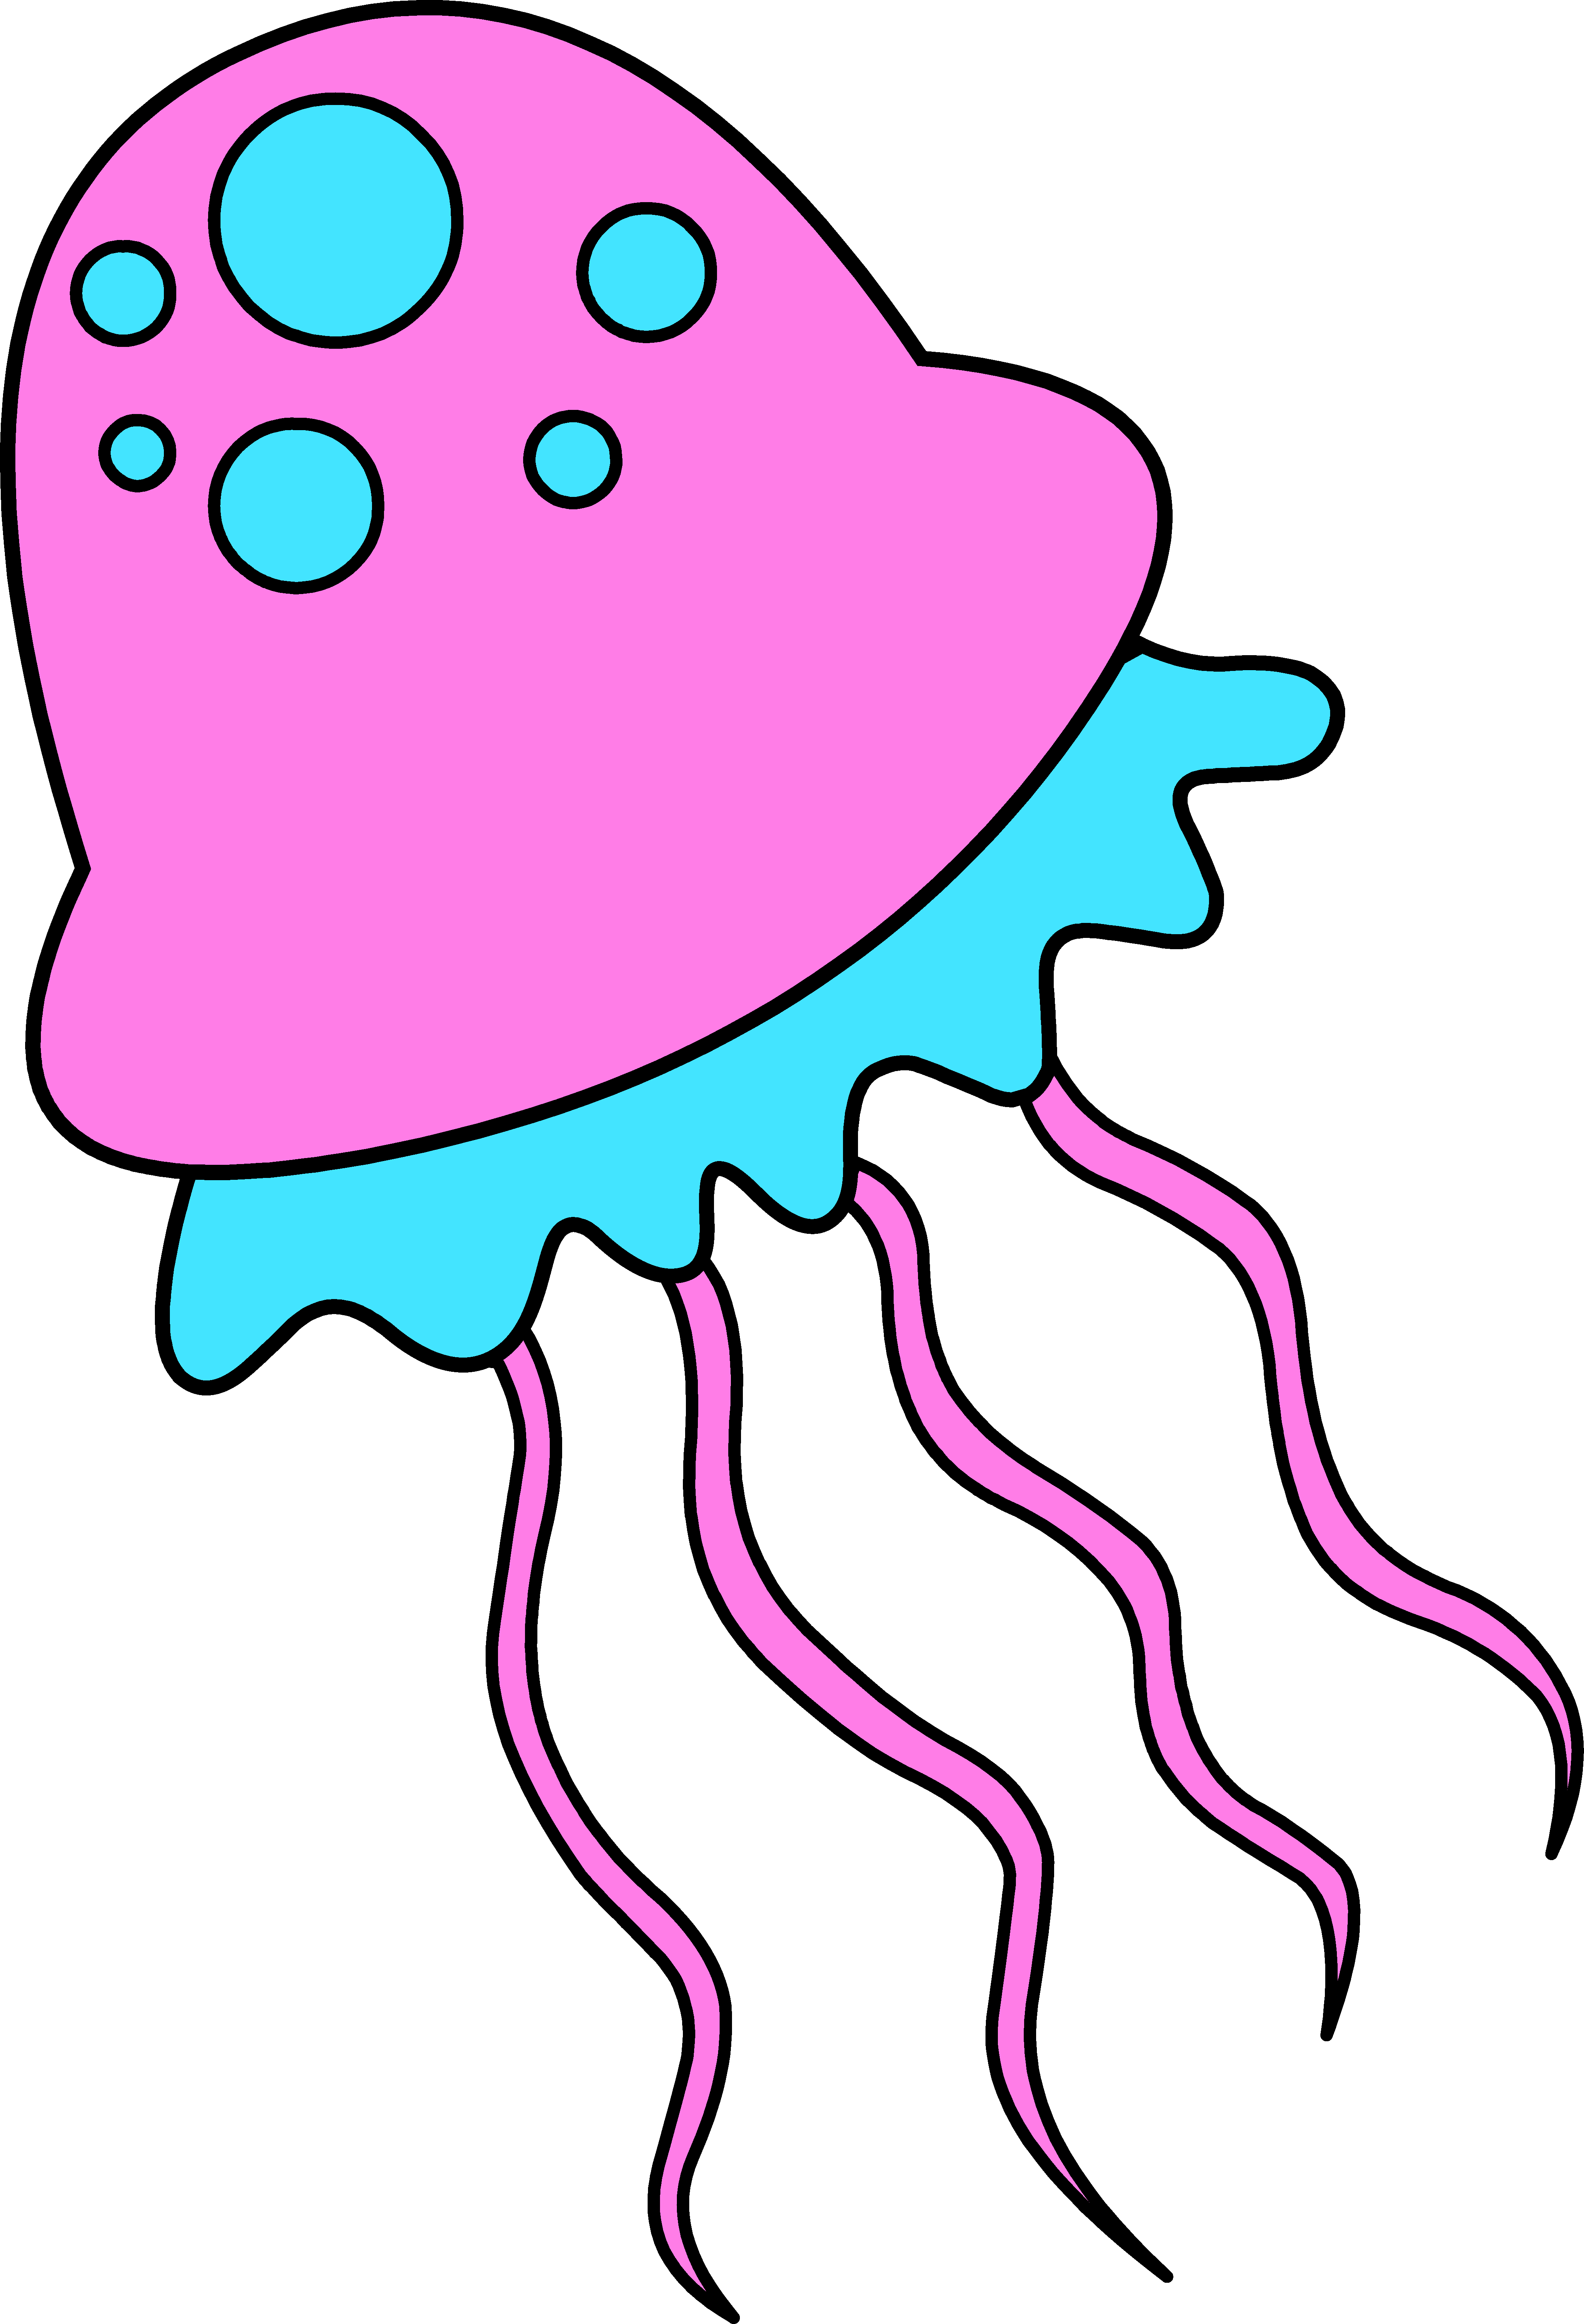 Jellyfish clipart jelly.